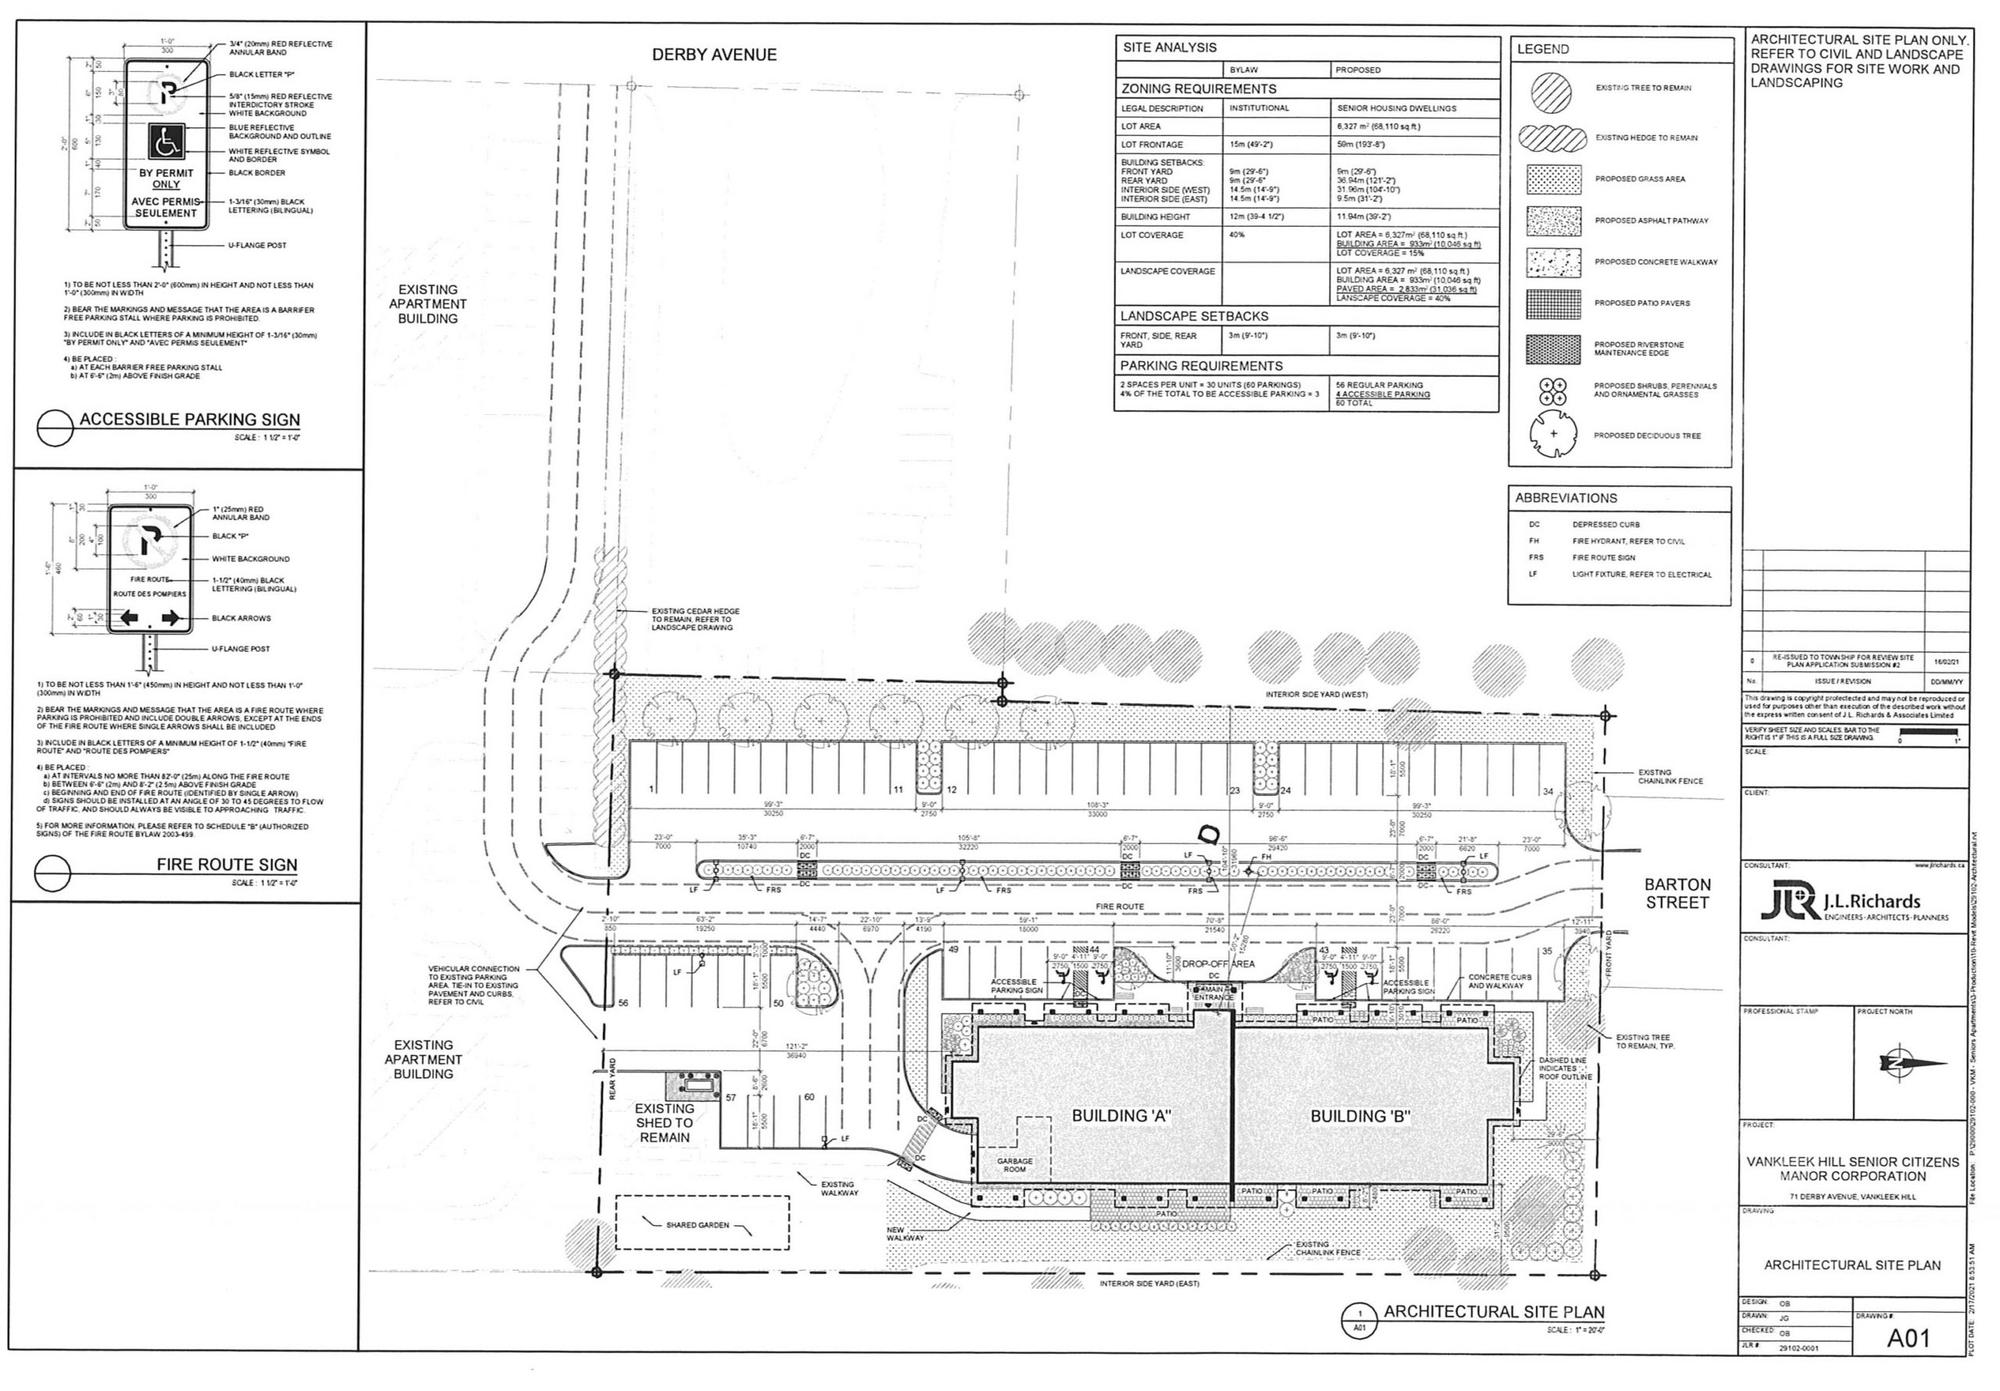 Site plan in place for Vankleek Hill Senior Citizens Manor; organization waiting for news on funding application